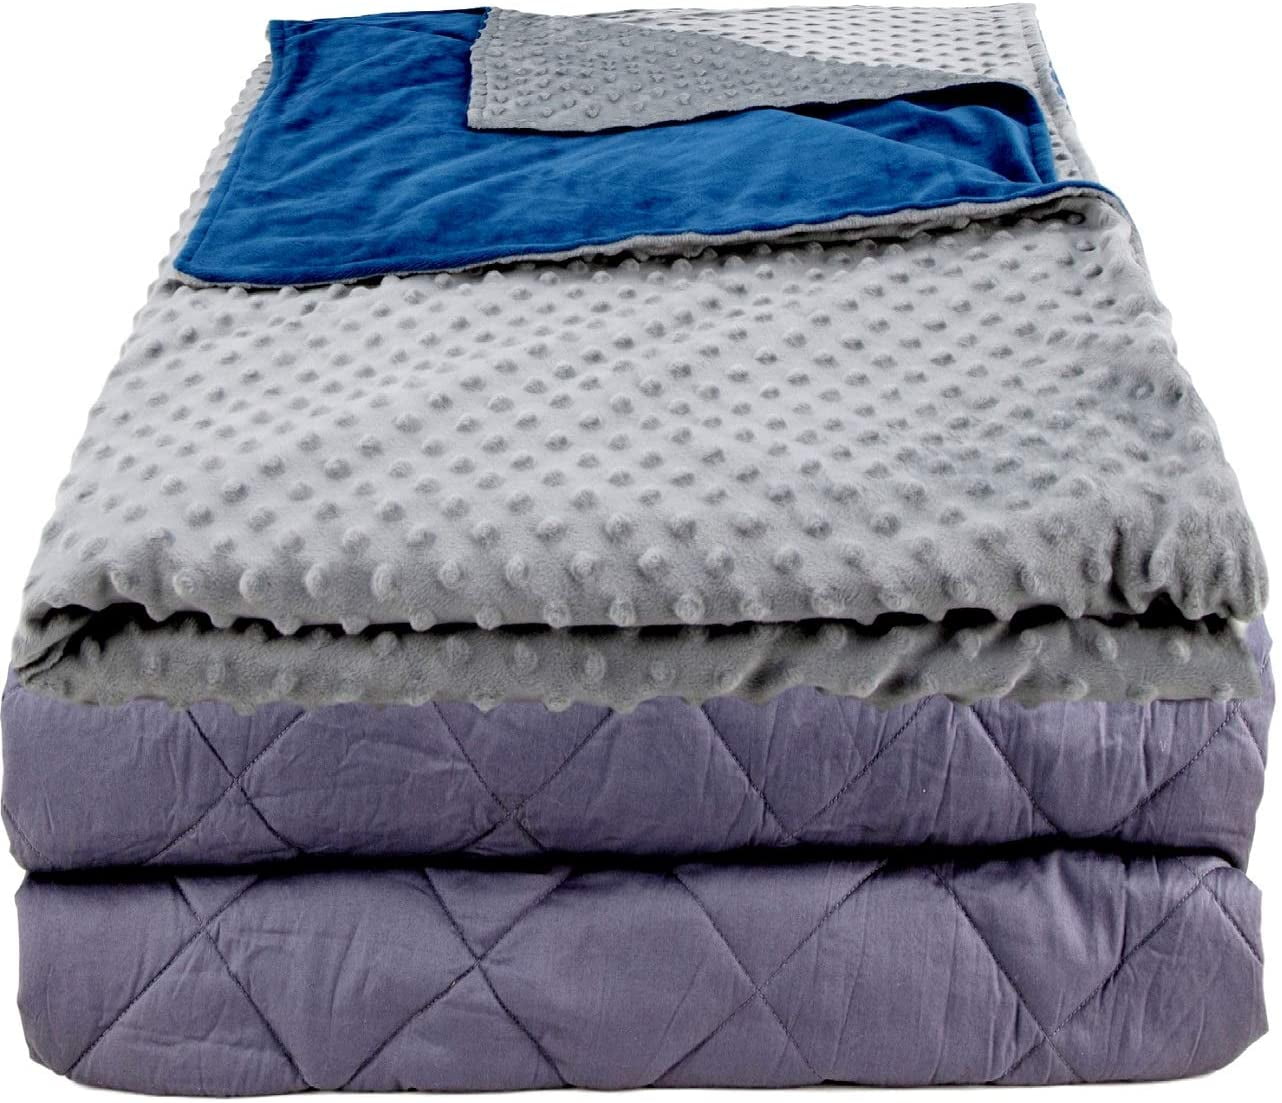 Duido - 25 lbs Weighted Blanket (Cooling Cotton) | Adult 60"x80" | w